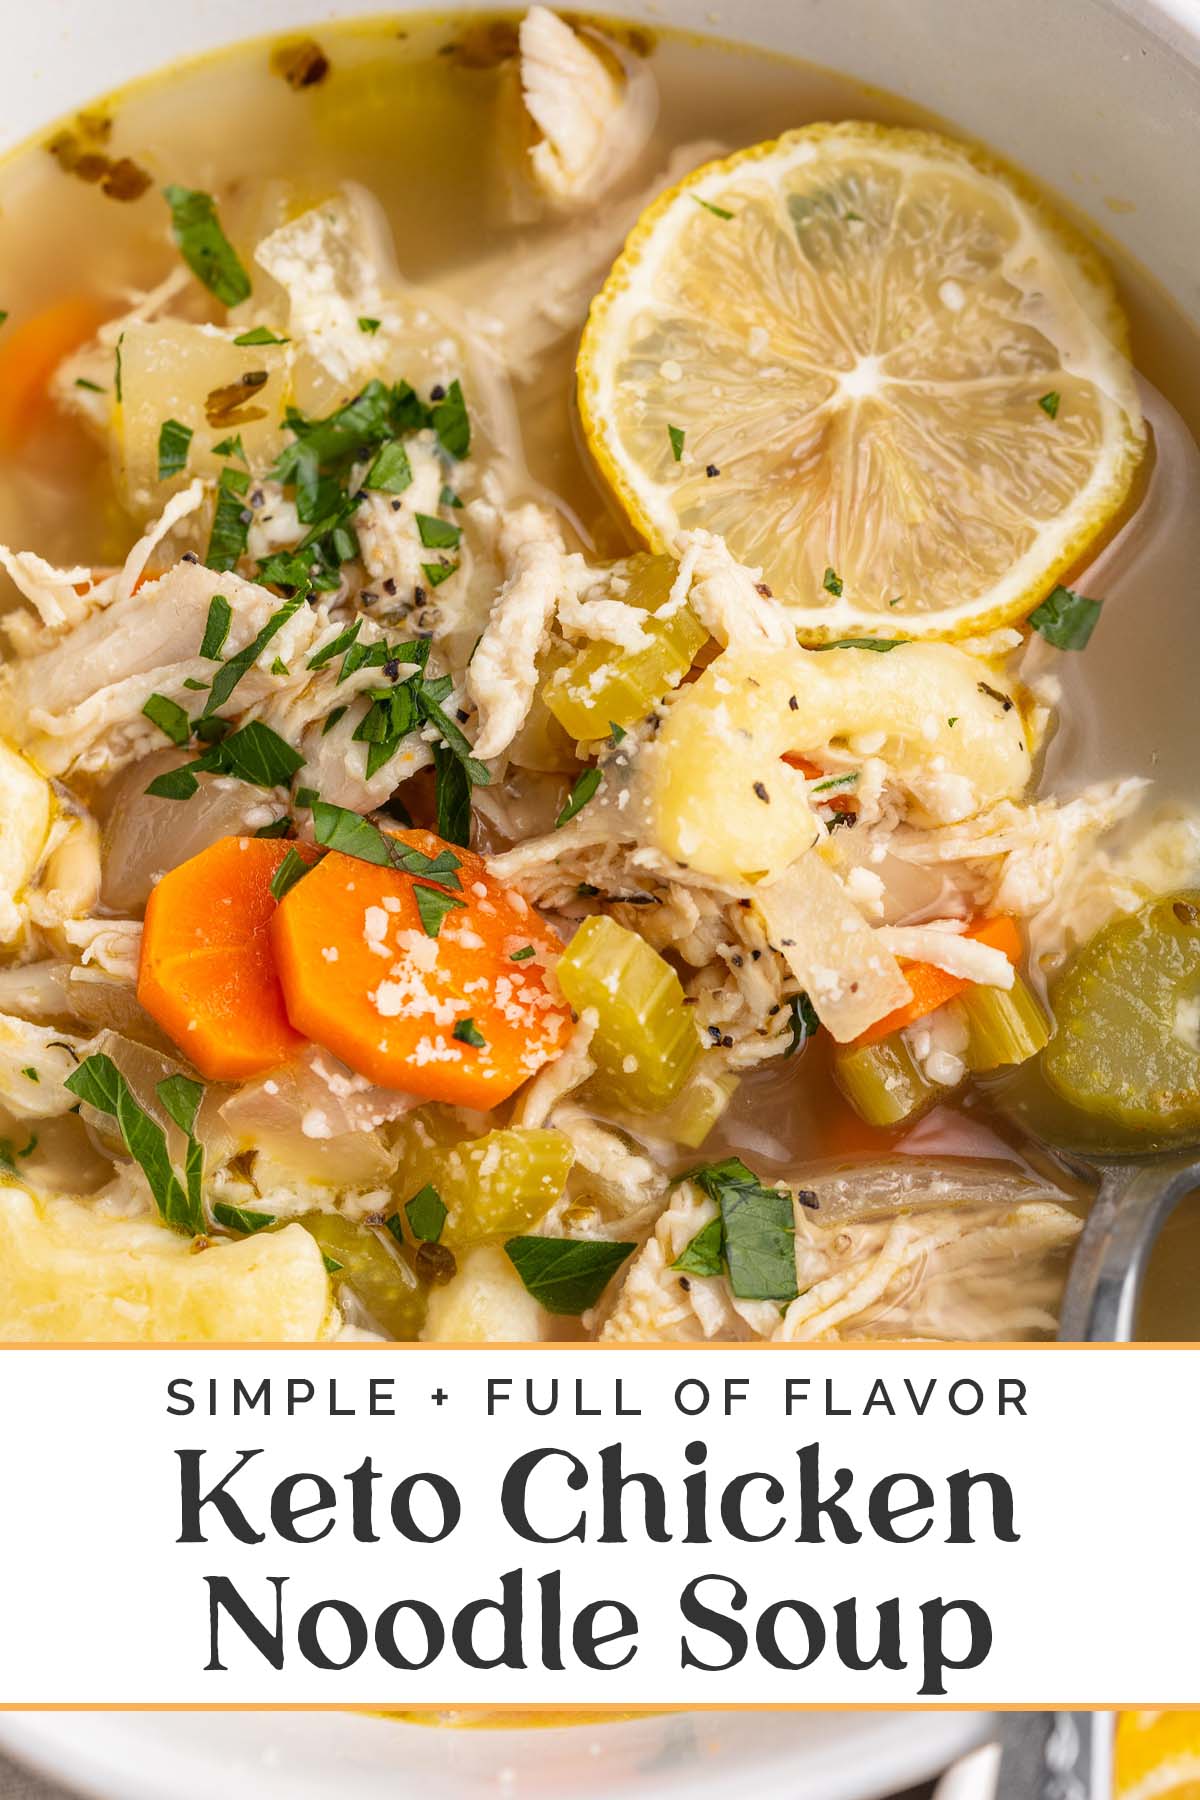 Pin graphic for keto chicken noodle soup.